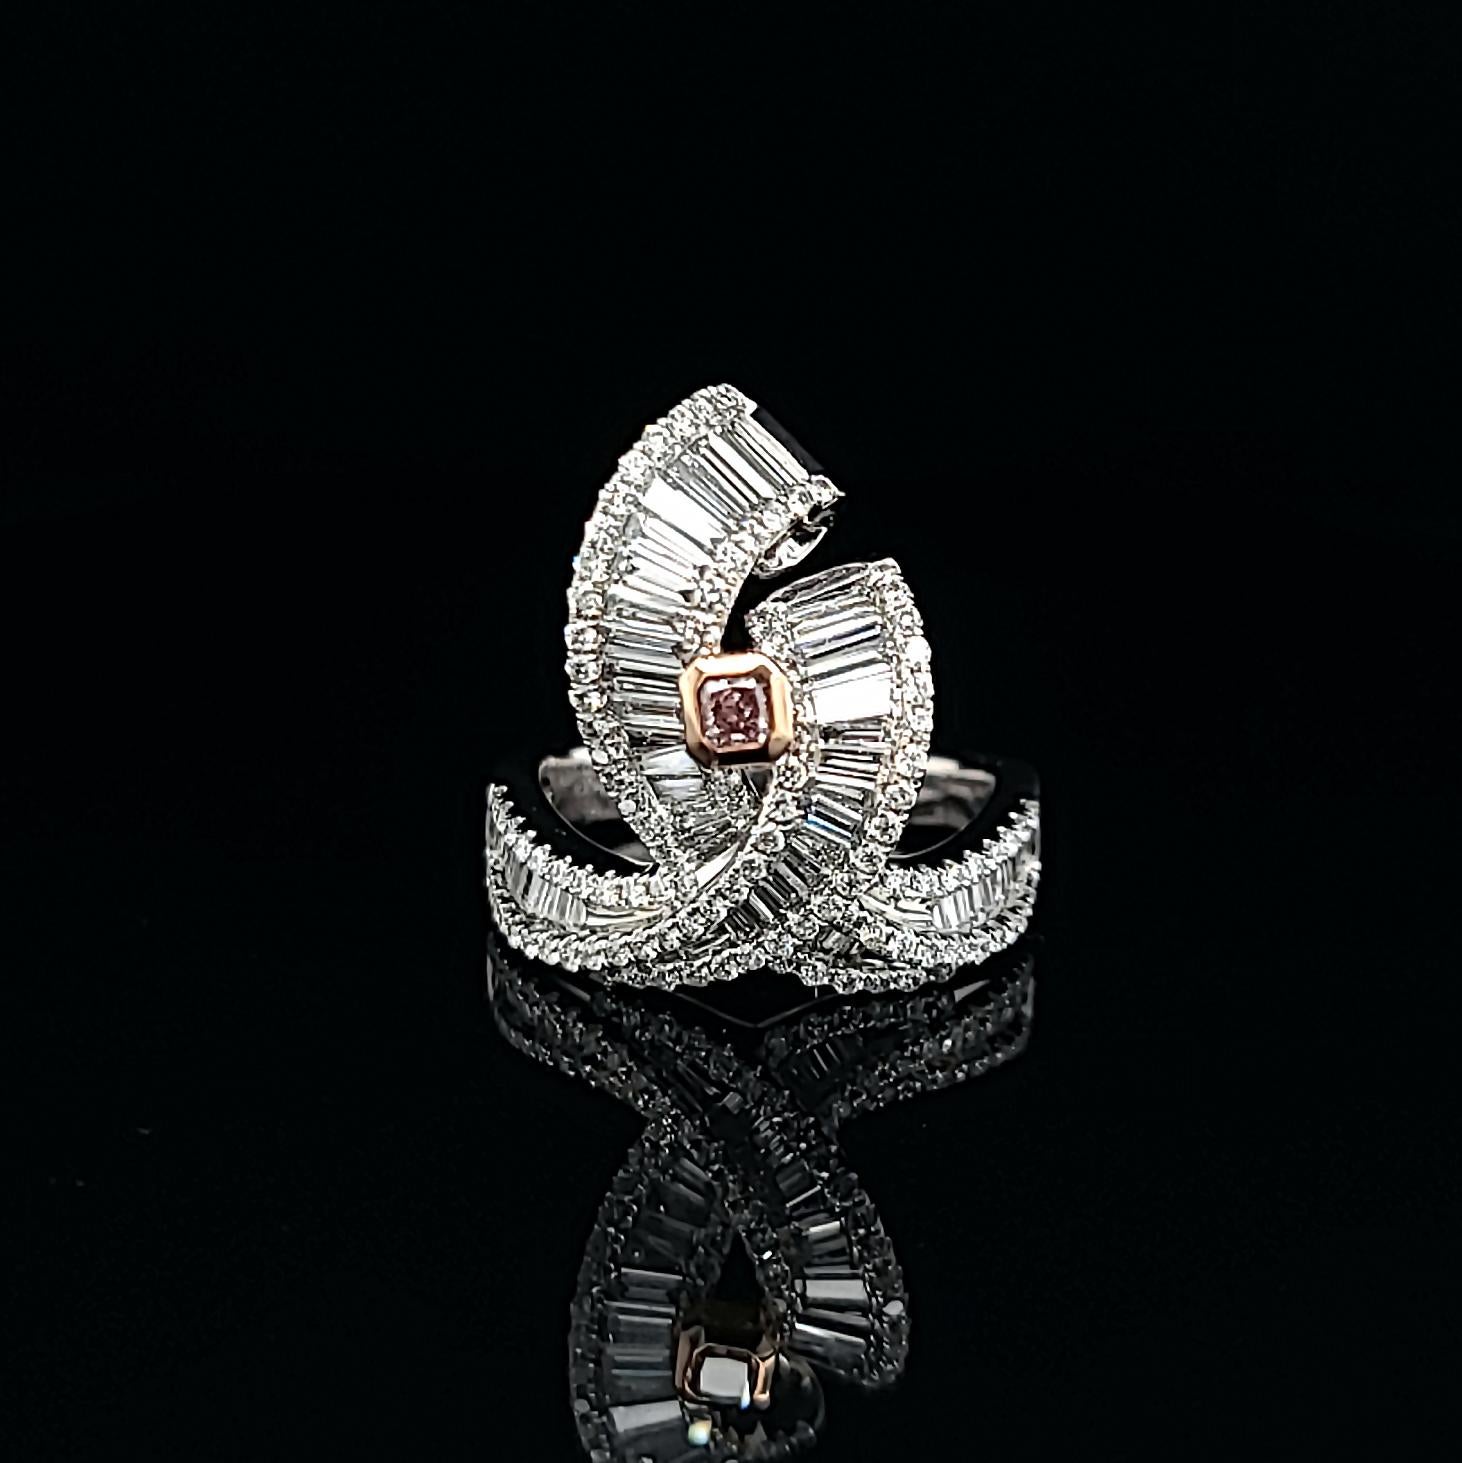 Argyle Pink Diamond 18k White Gold Rose Gold Ring by Kristin Hanson. A gentle and soft wind can be a game-changer, mood lifter, and serene. The light blow of nature's fresh breeze is a feeling, an emotion, and an earthly pleasure that everyone can